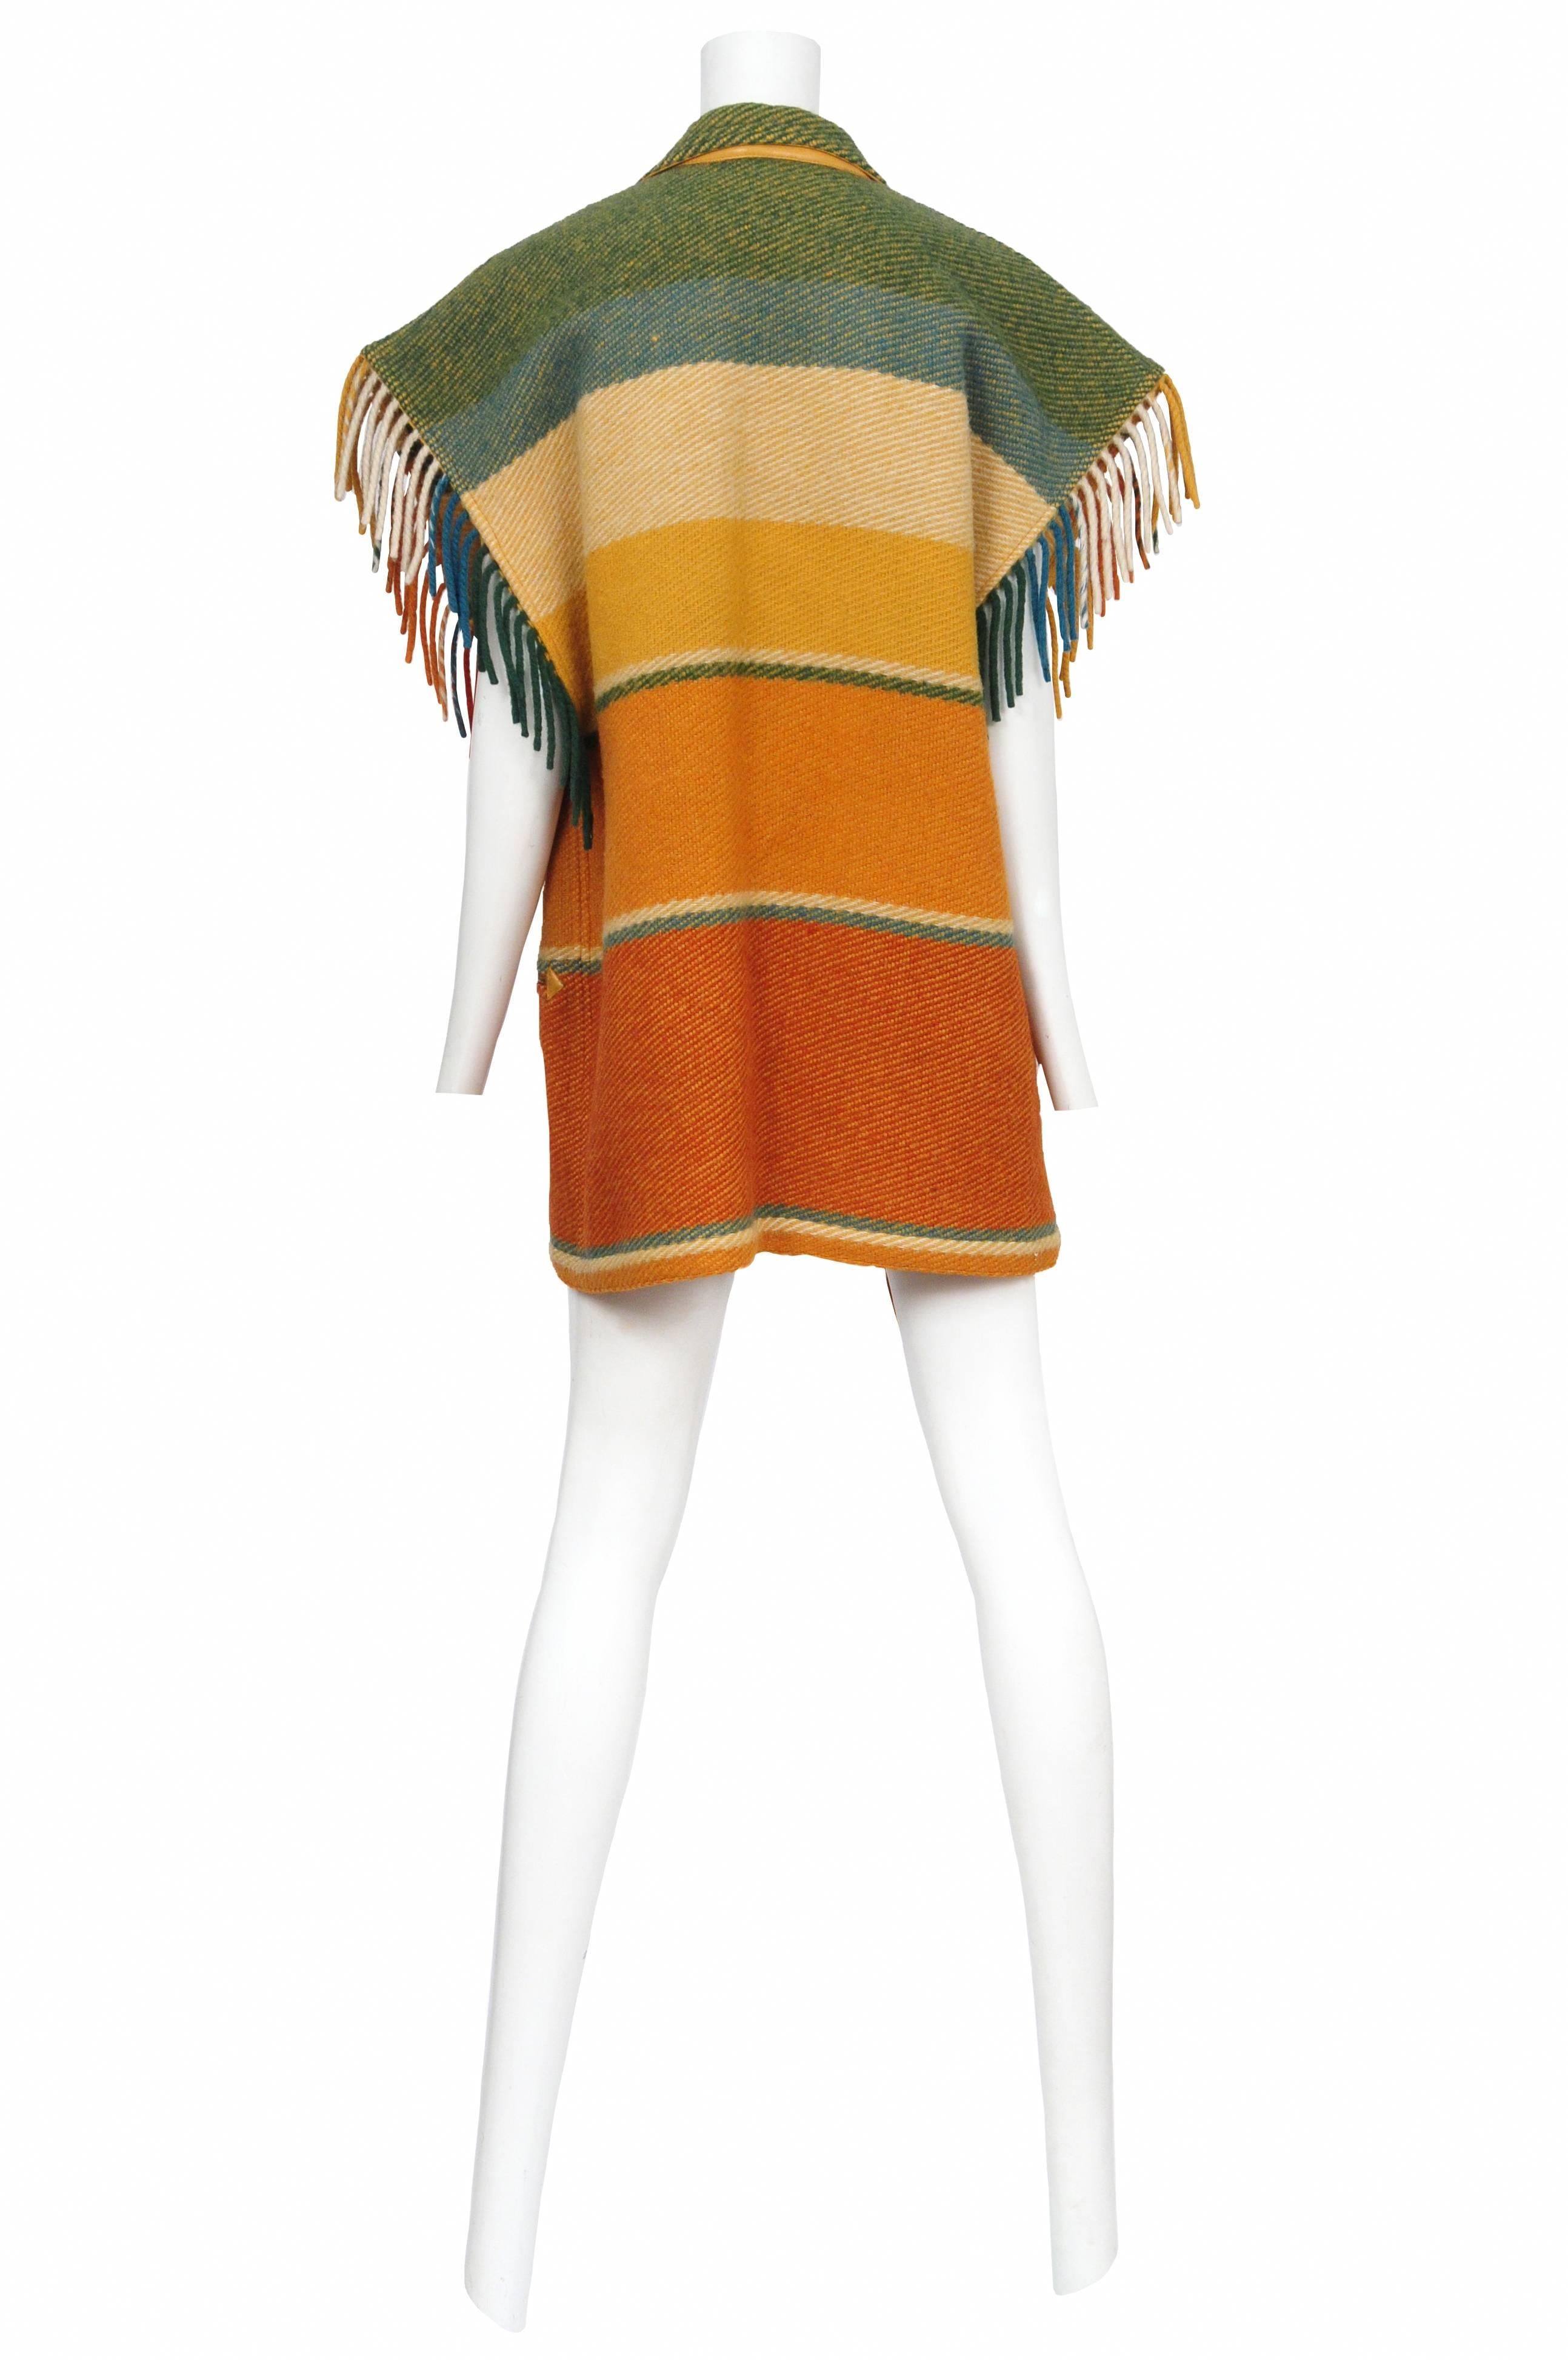 Vintage Jean Charles de Castelbajac orange, yellow and green stripe blanket vest featuring fringe along the collar and arm hole edges. 